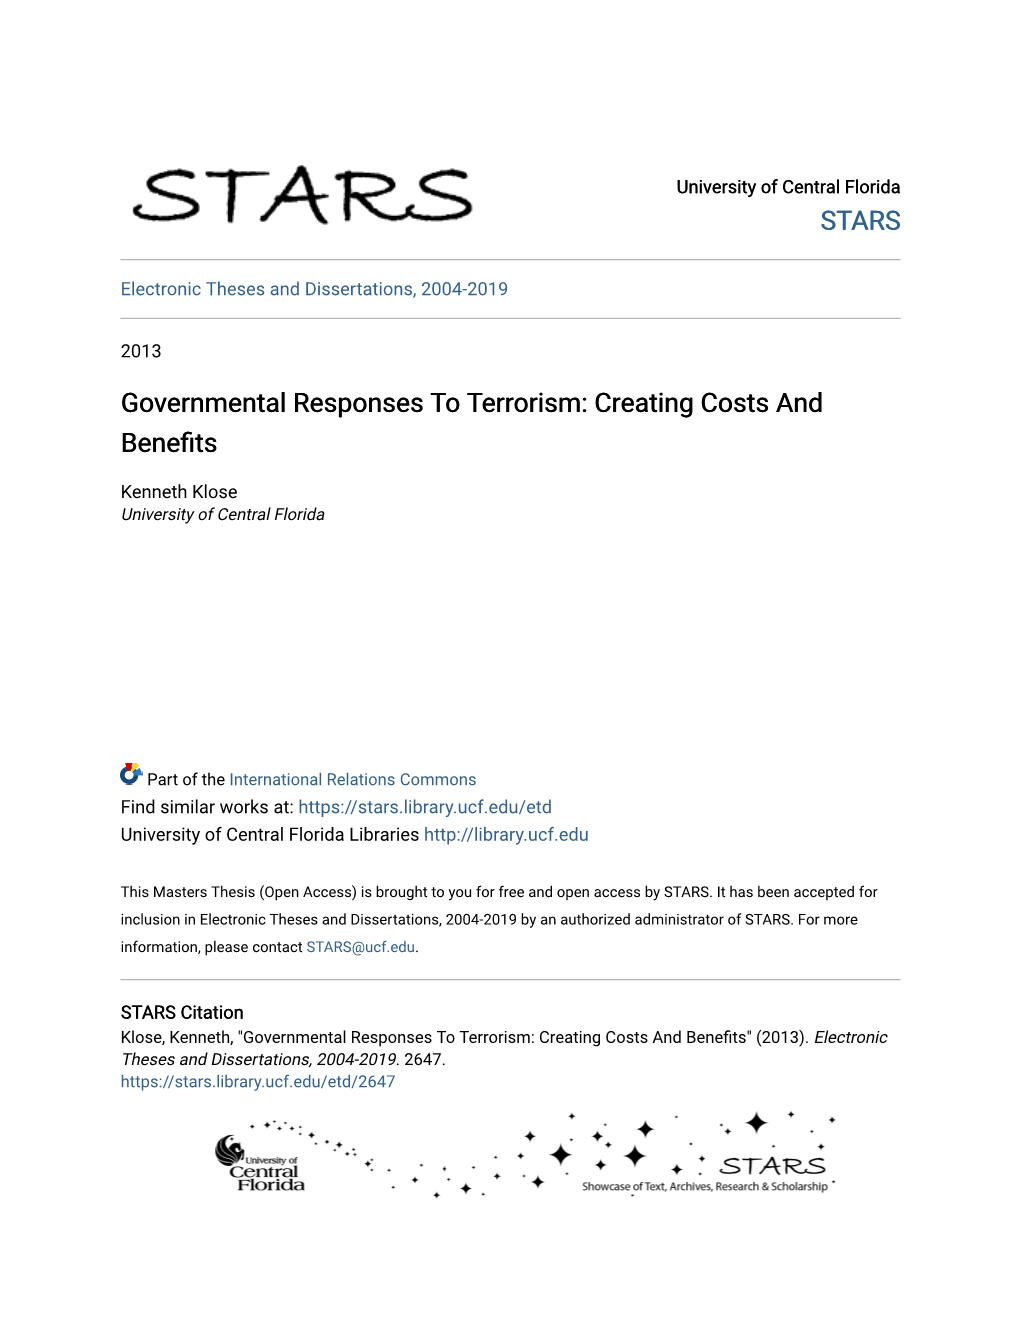 Governmental Responses to Terrorism: Creating Costs and Benefits